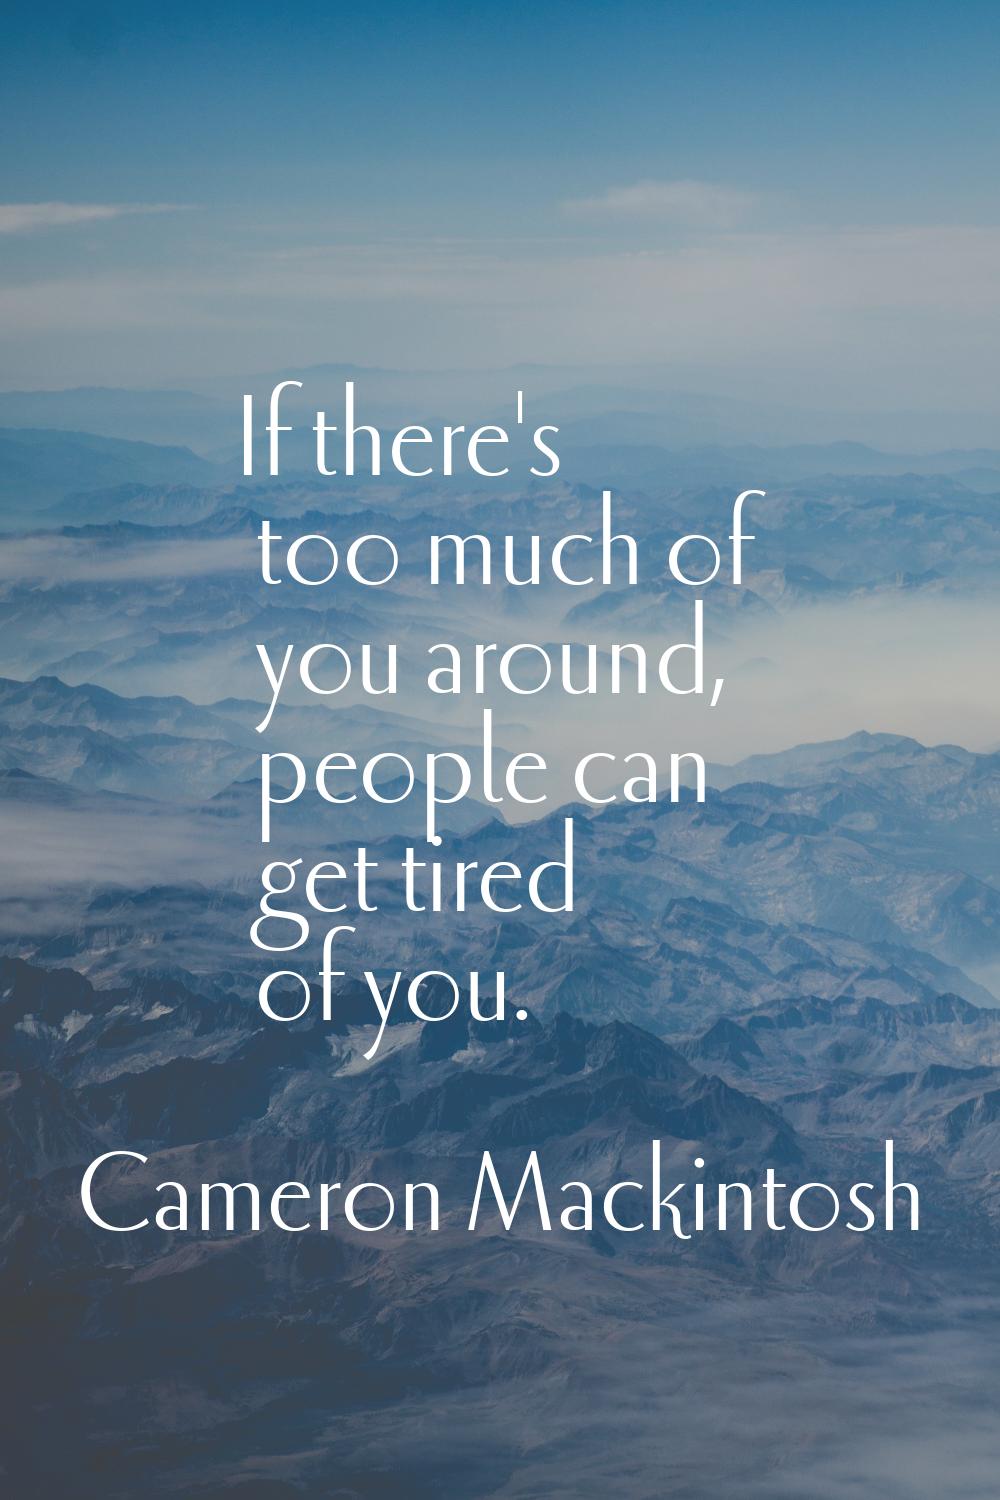 If there's too much of you around, people can get tired of you.